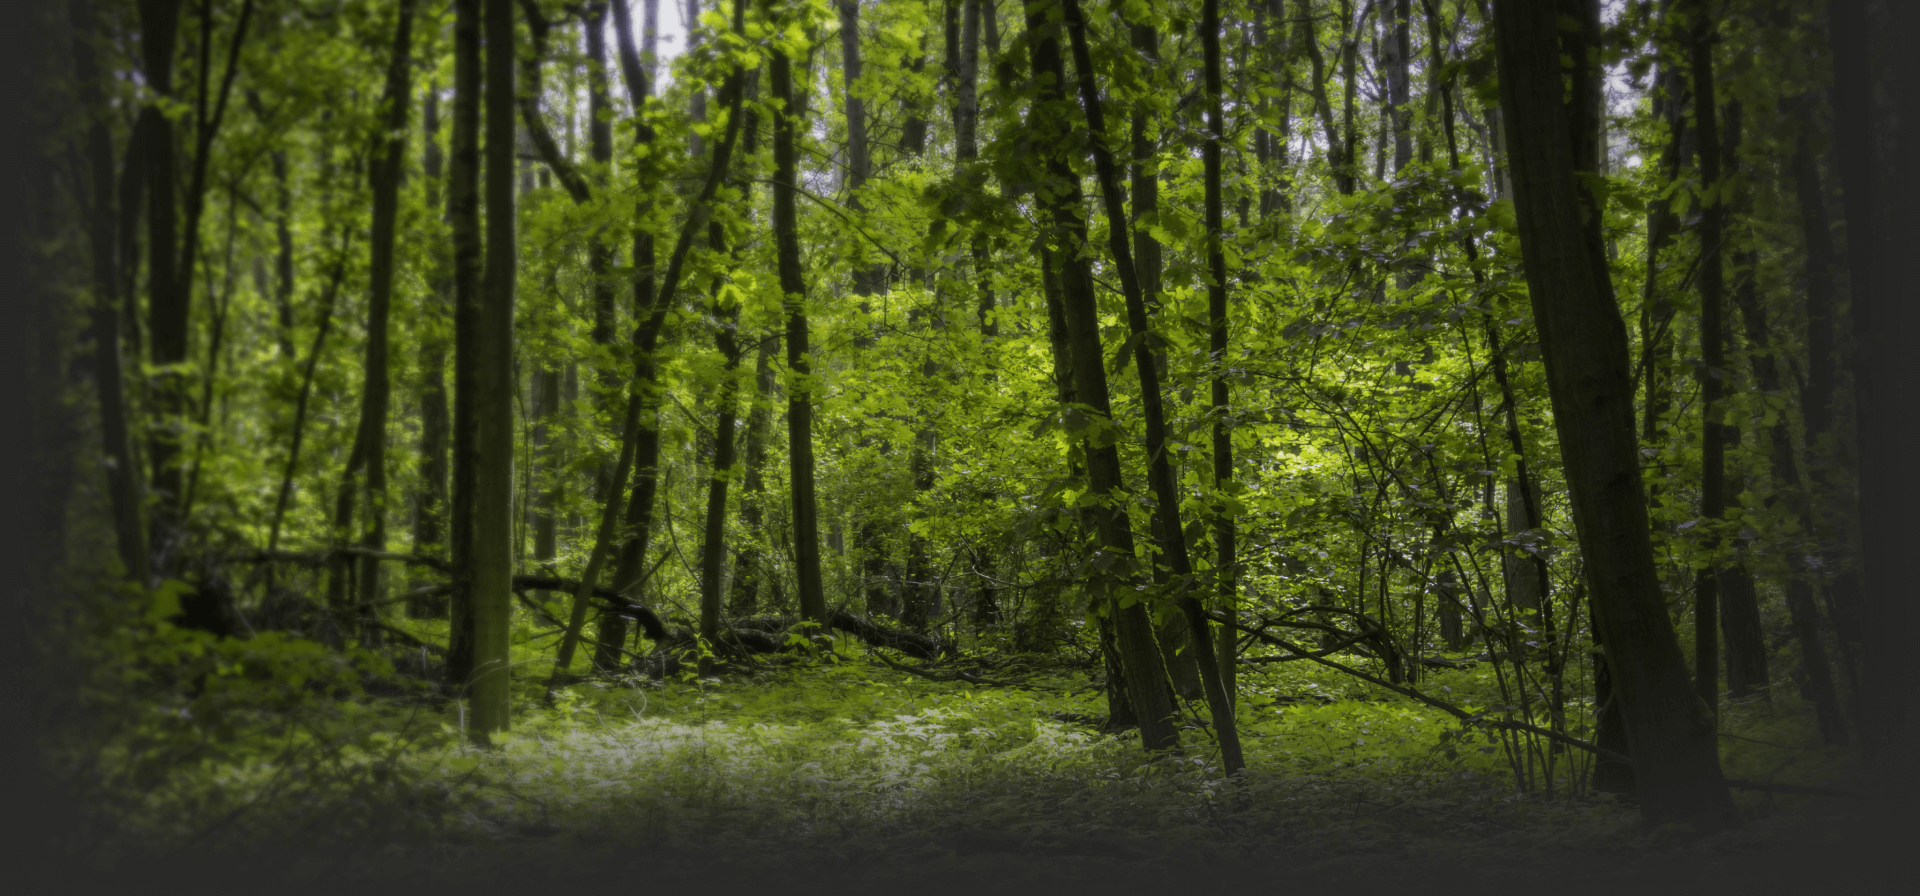 Dense vegetated forest with tall leafy trees and small green plants.